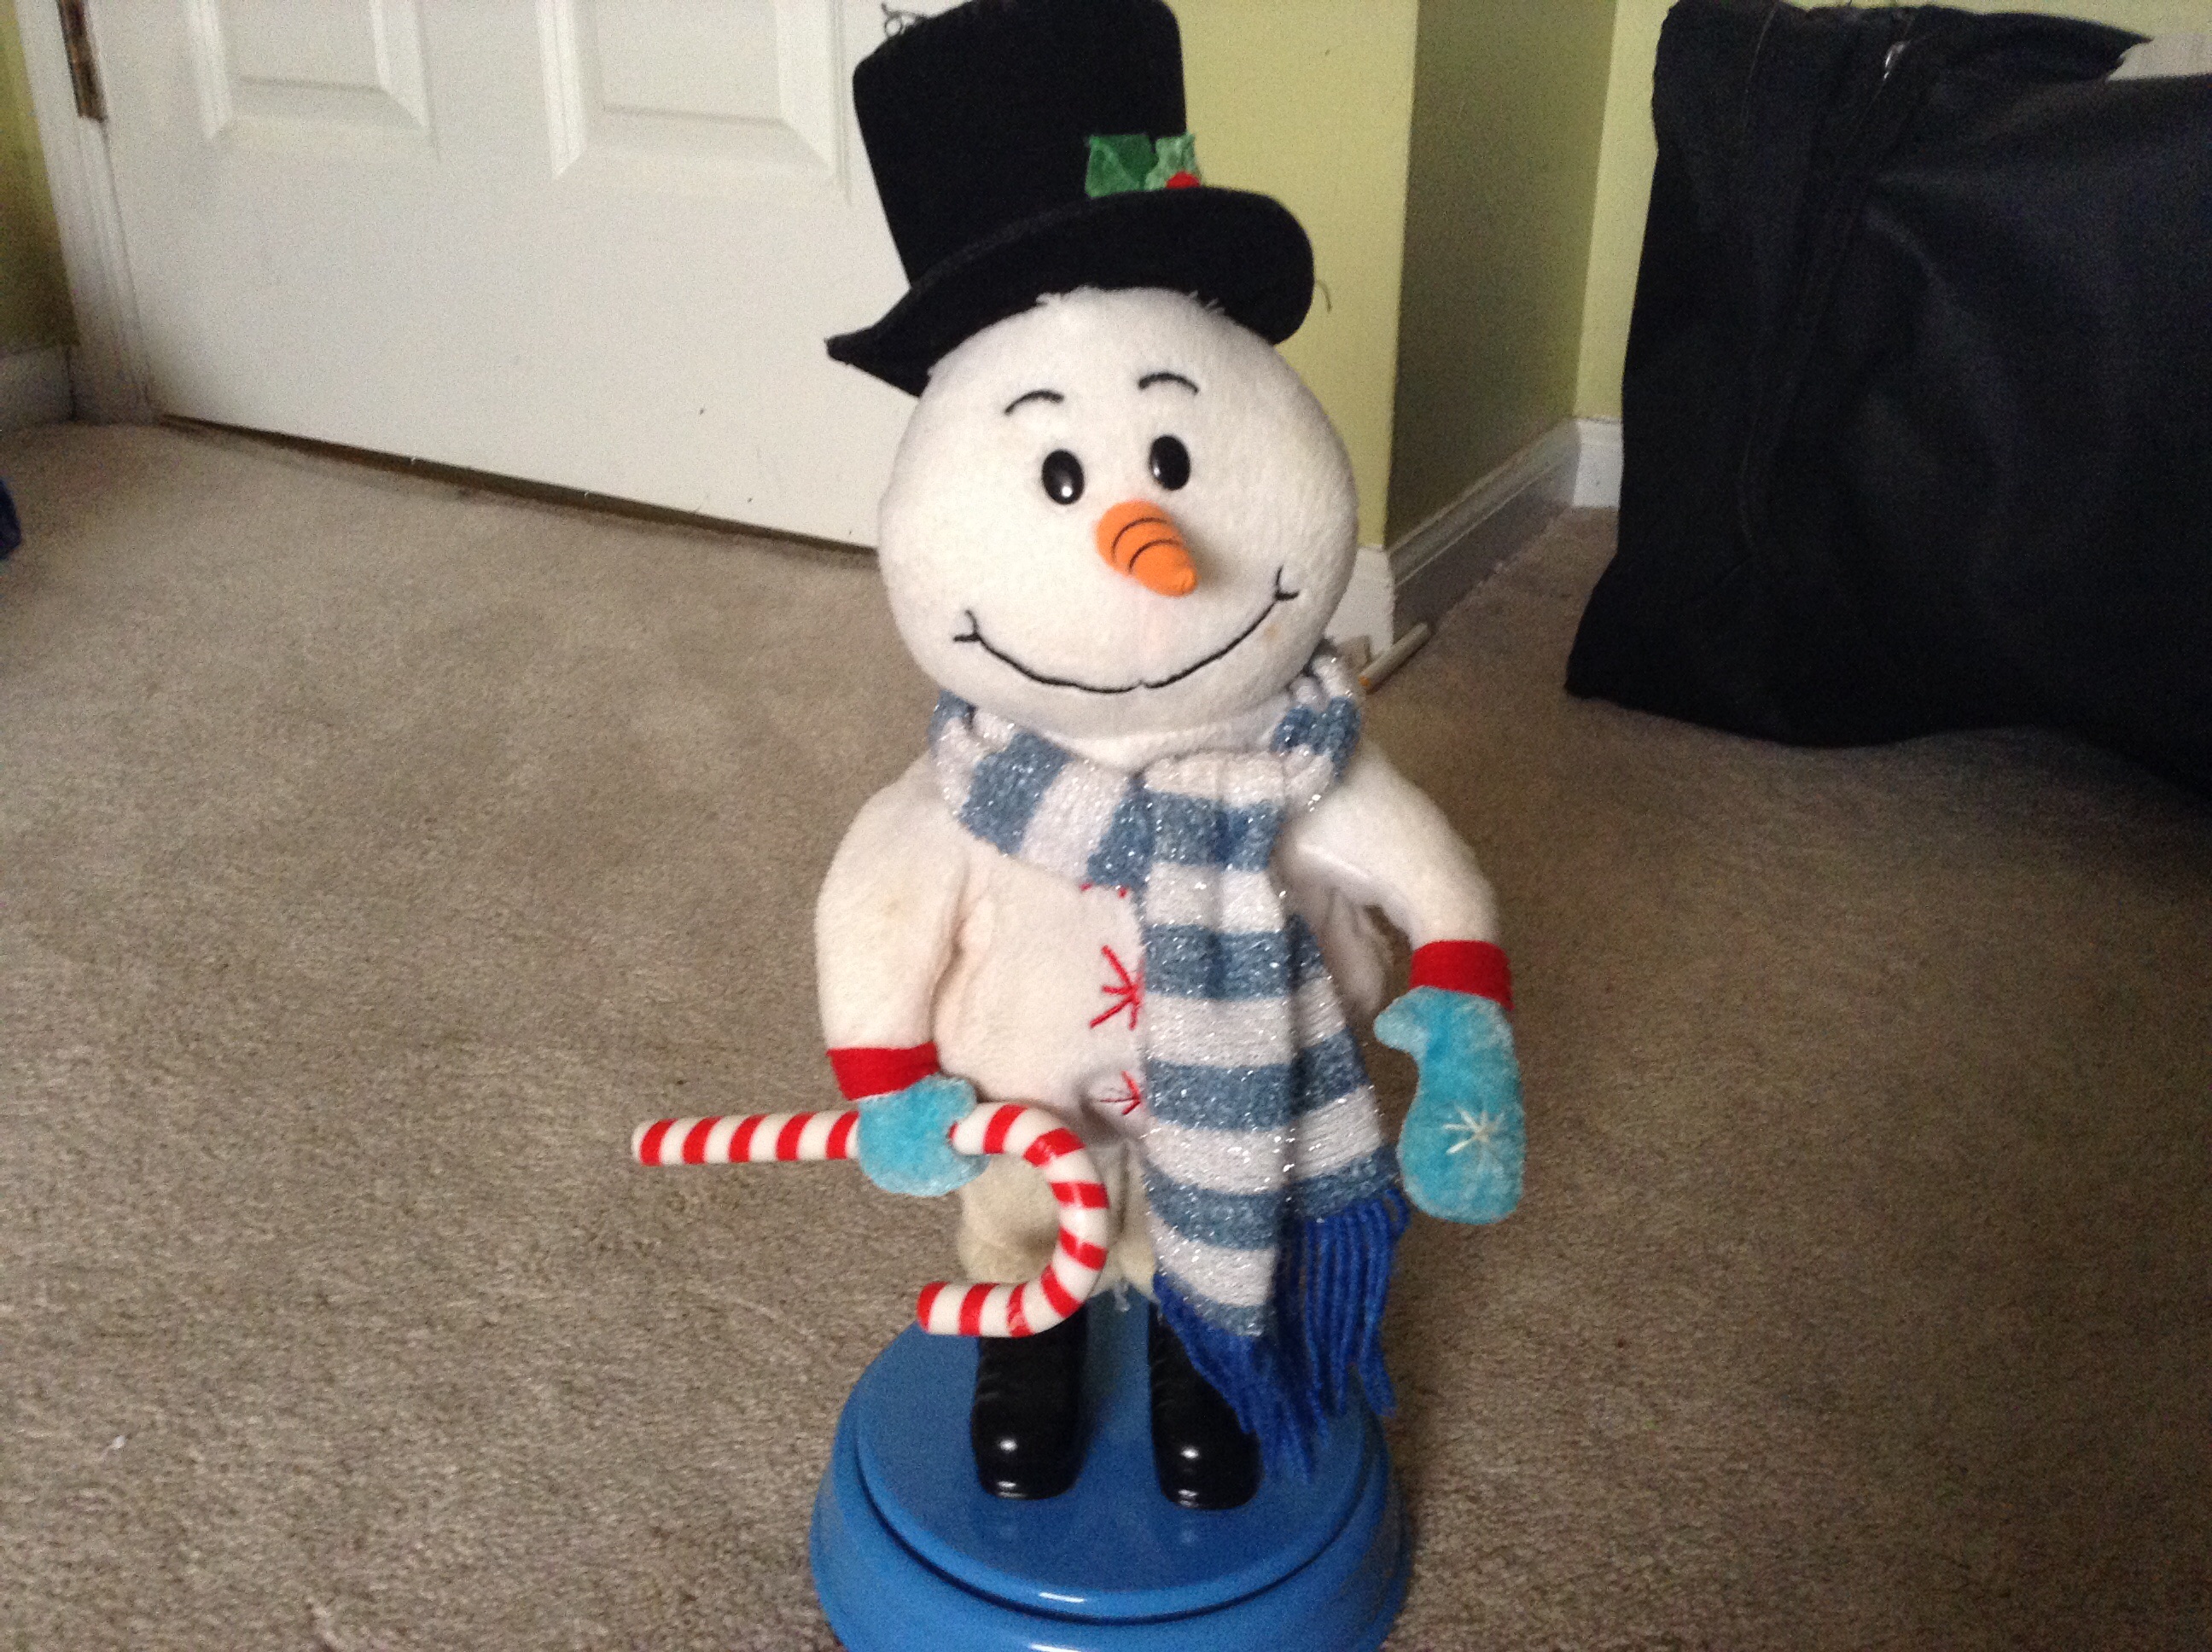 Details about   Gemmy Spinning Dancing Snowman Sings Dances Animated "Shake Your Groove Thing" 